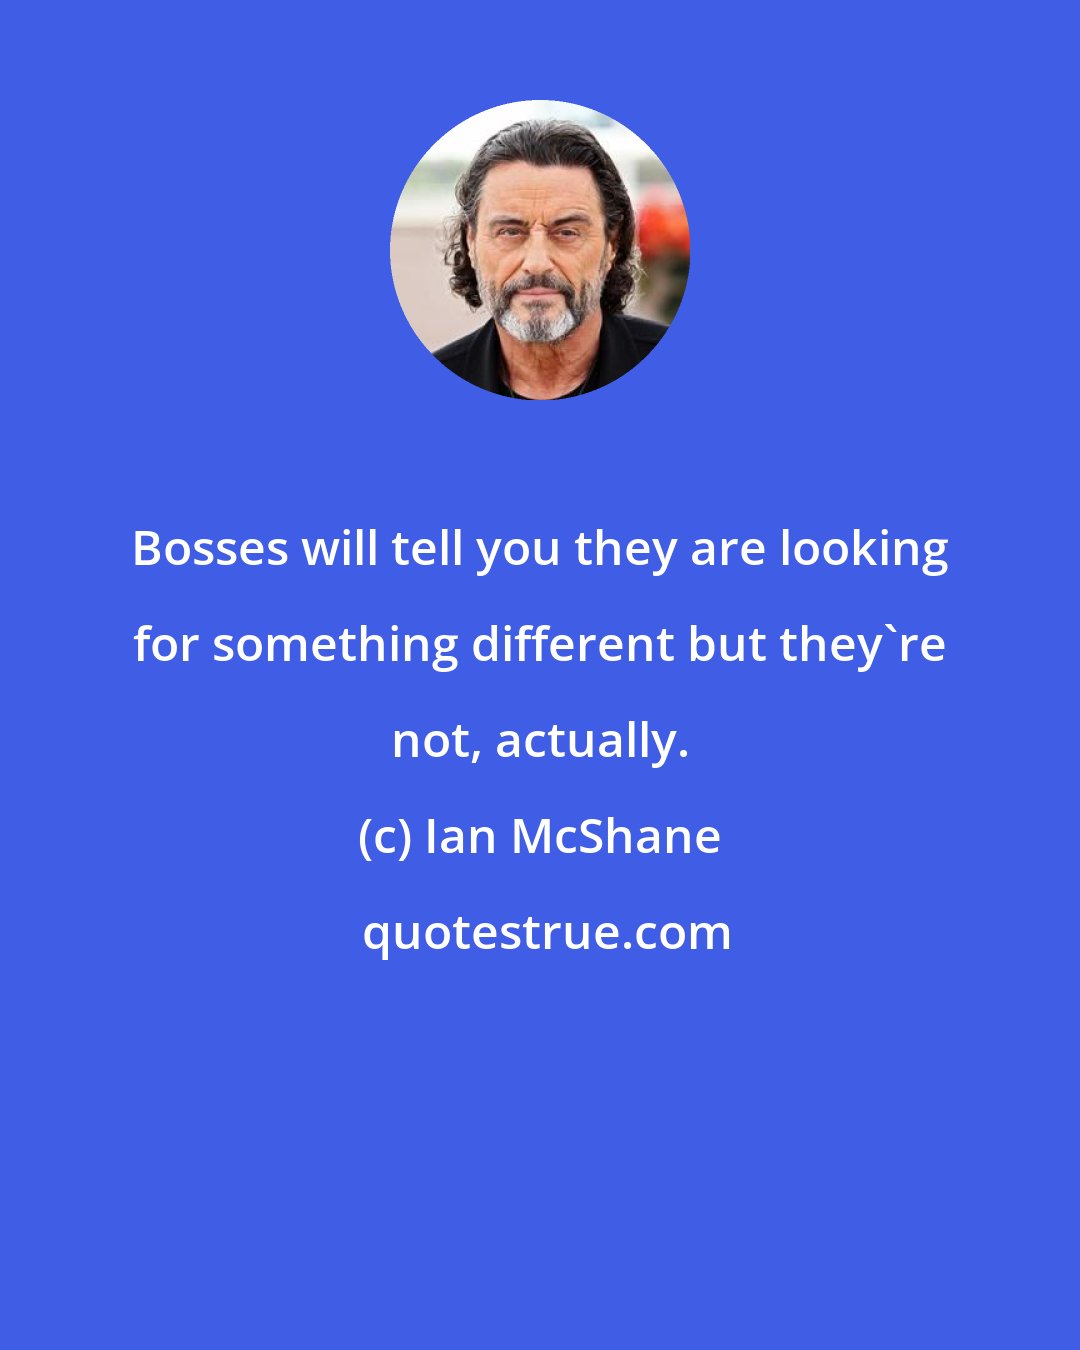 Ian McShane: Bosses will tell you they are looking for something different but they're not, actually.